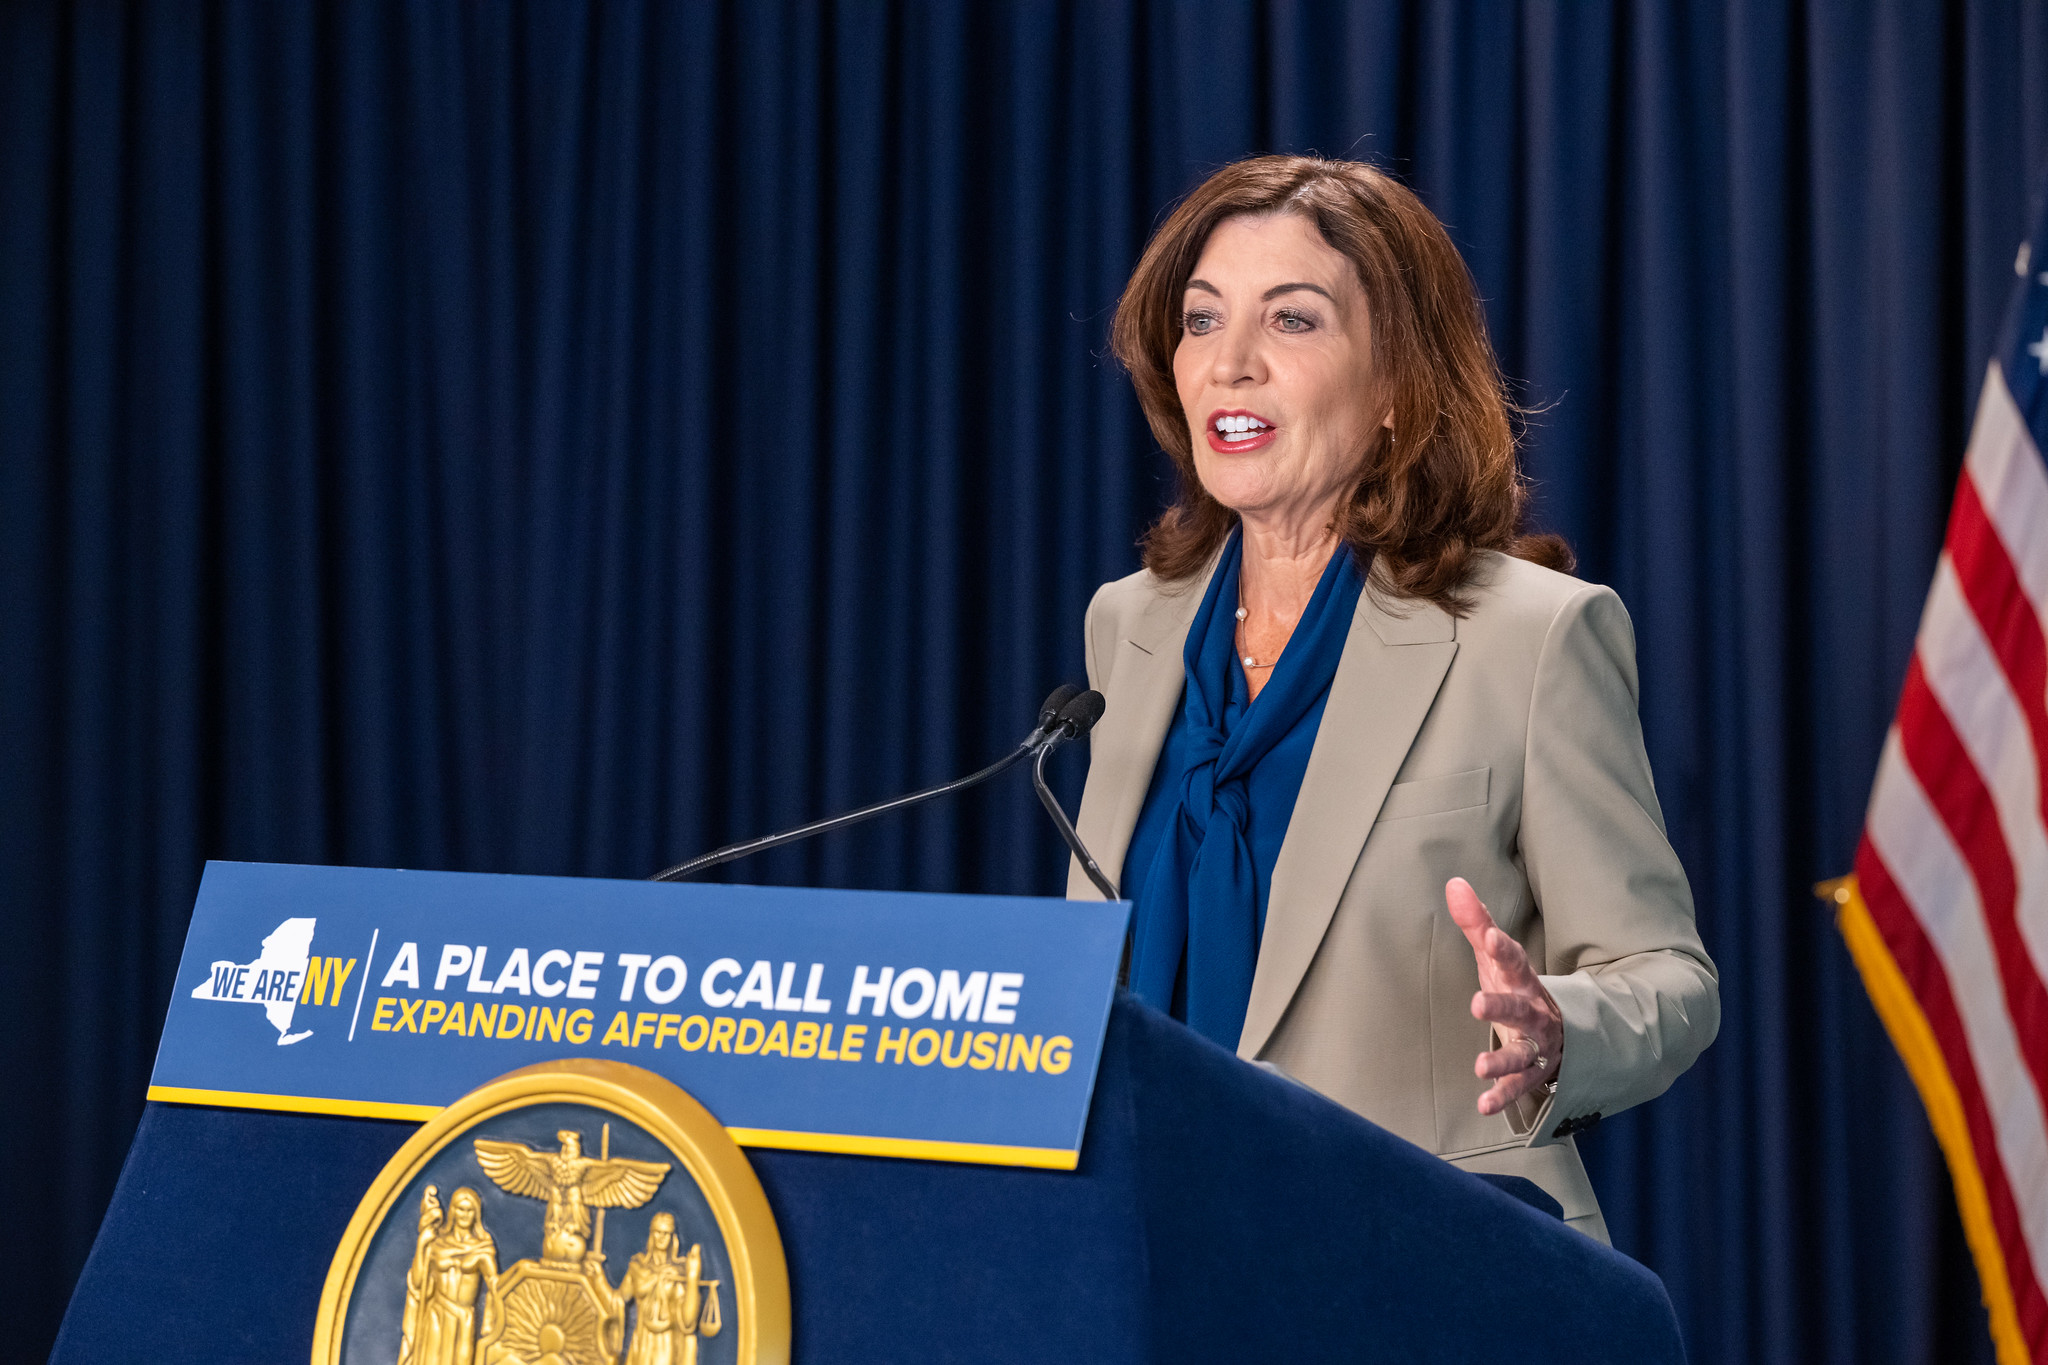 Gov. Kathy Hochul speaking at a press conference behind a podium.